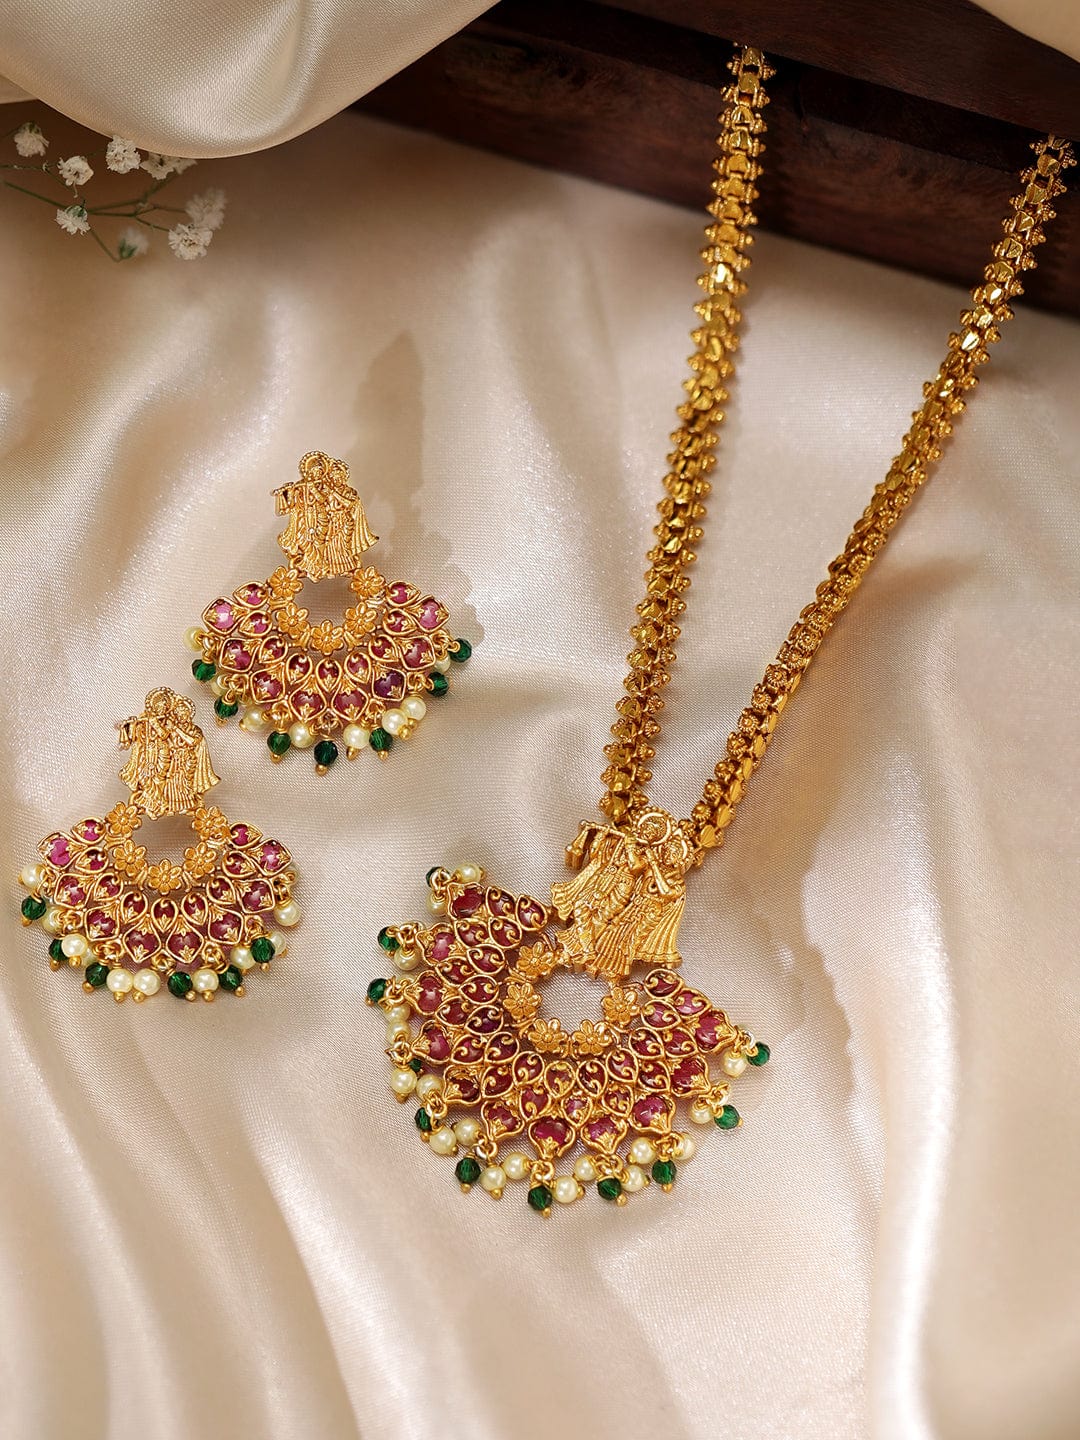 Rubans 24K Gold Plated Red Zircons And Pearl Beaded Radha Krishna Temple Jewellery Set. Necklace Set